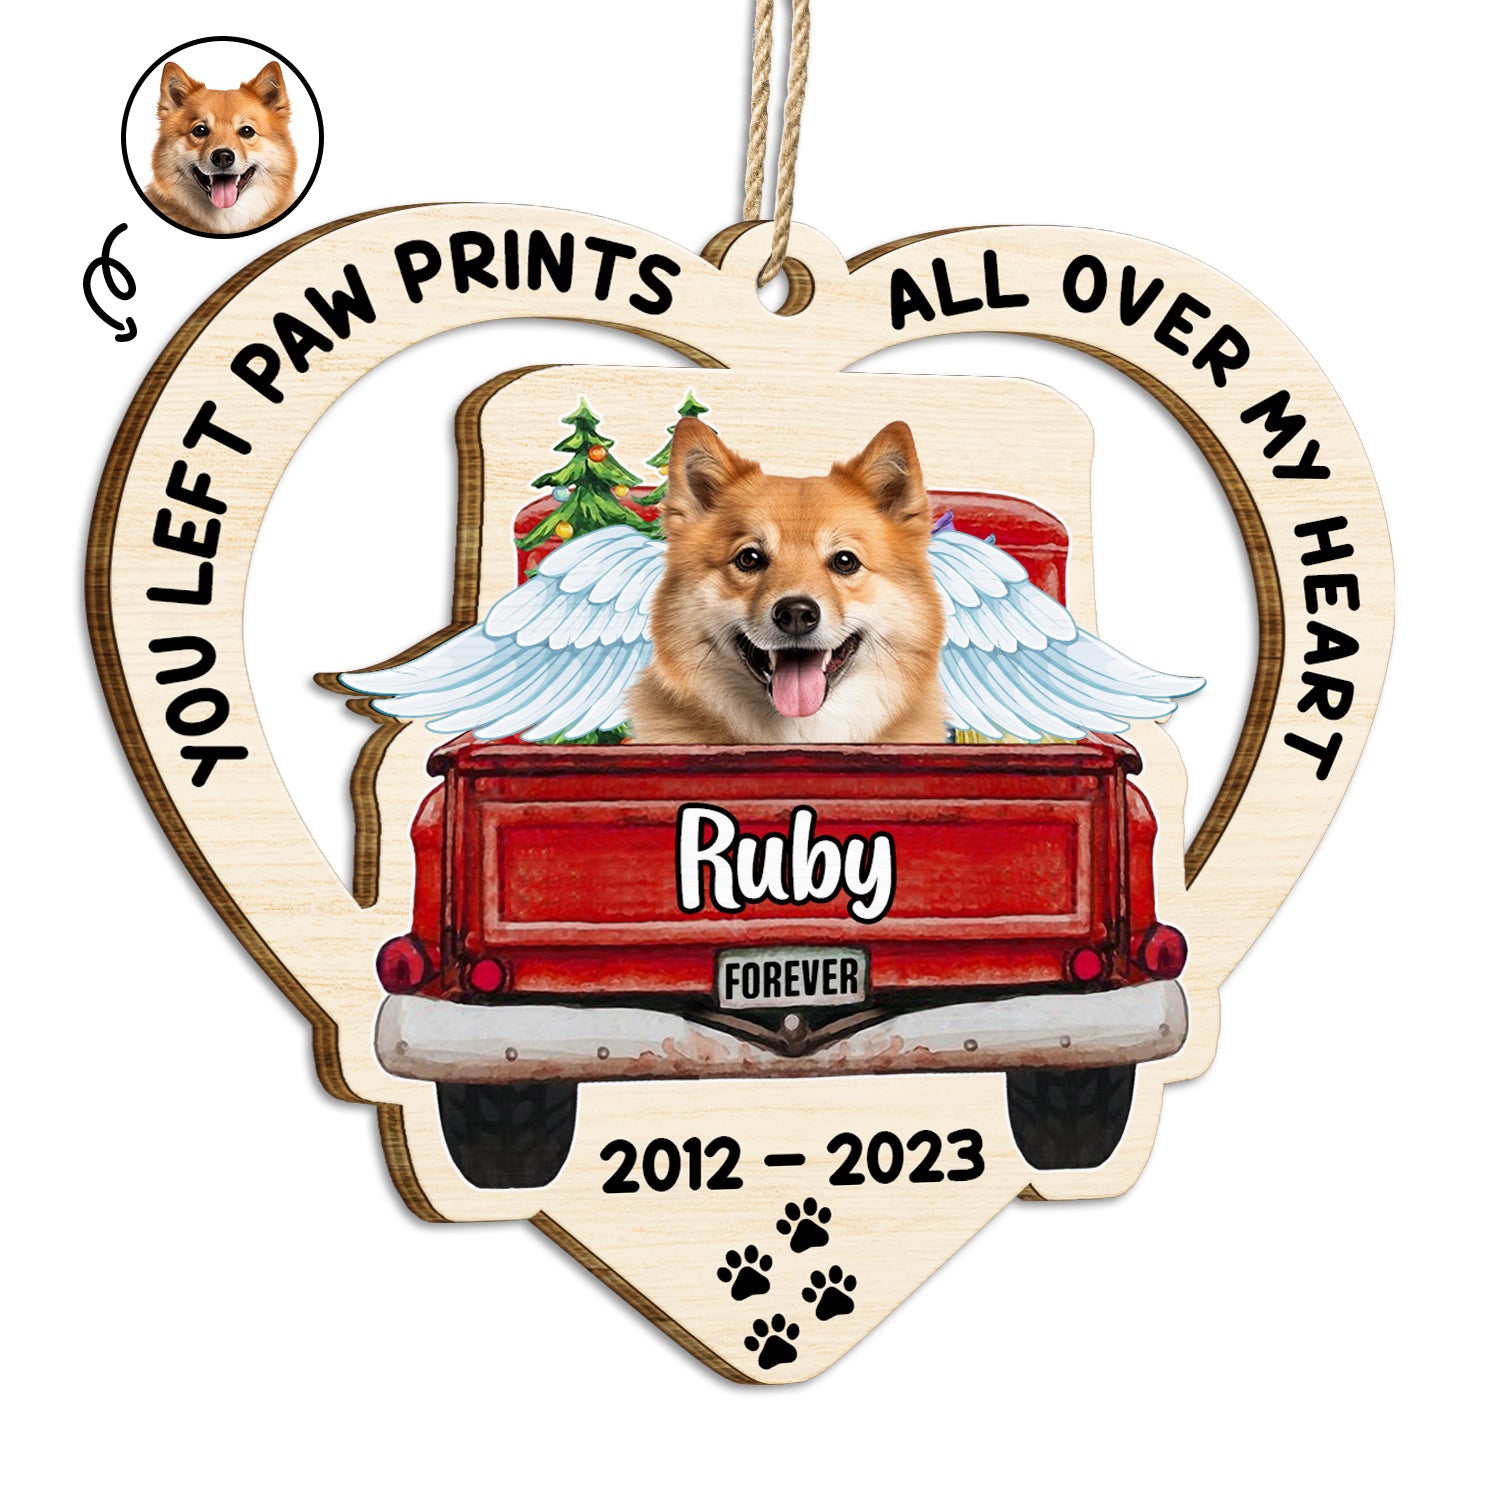 Custom Photo Your Paw Prints - Christmas Pet Memorial Gift - Personalized Wooden Cutout Ornament